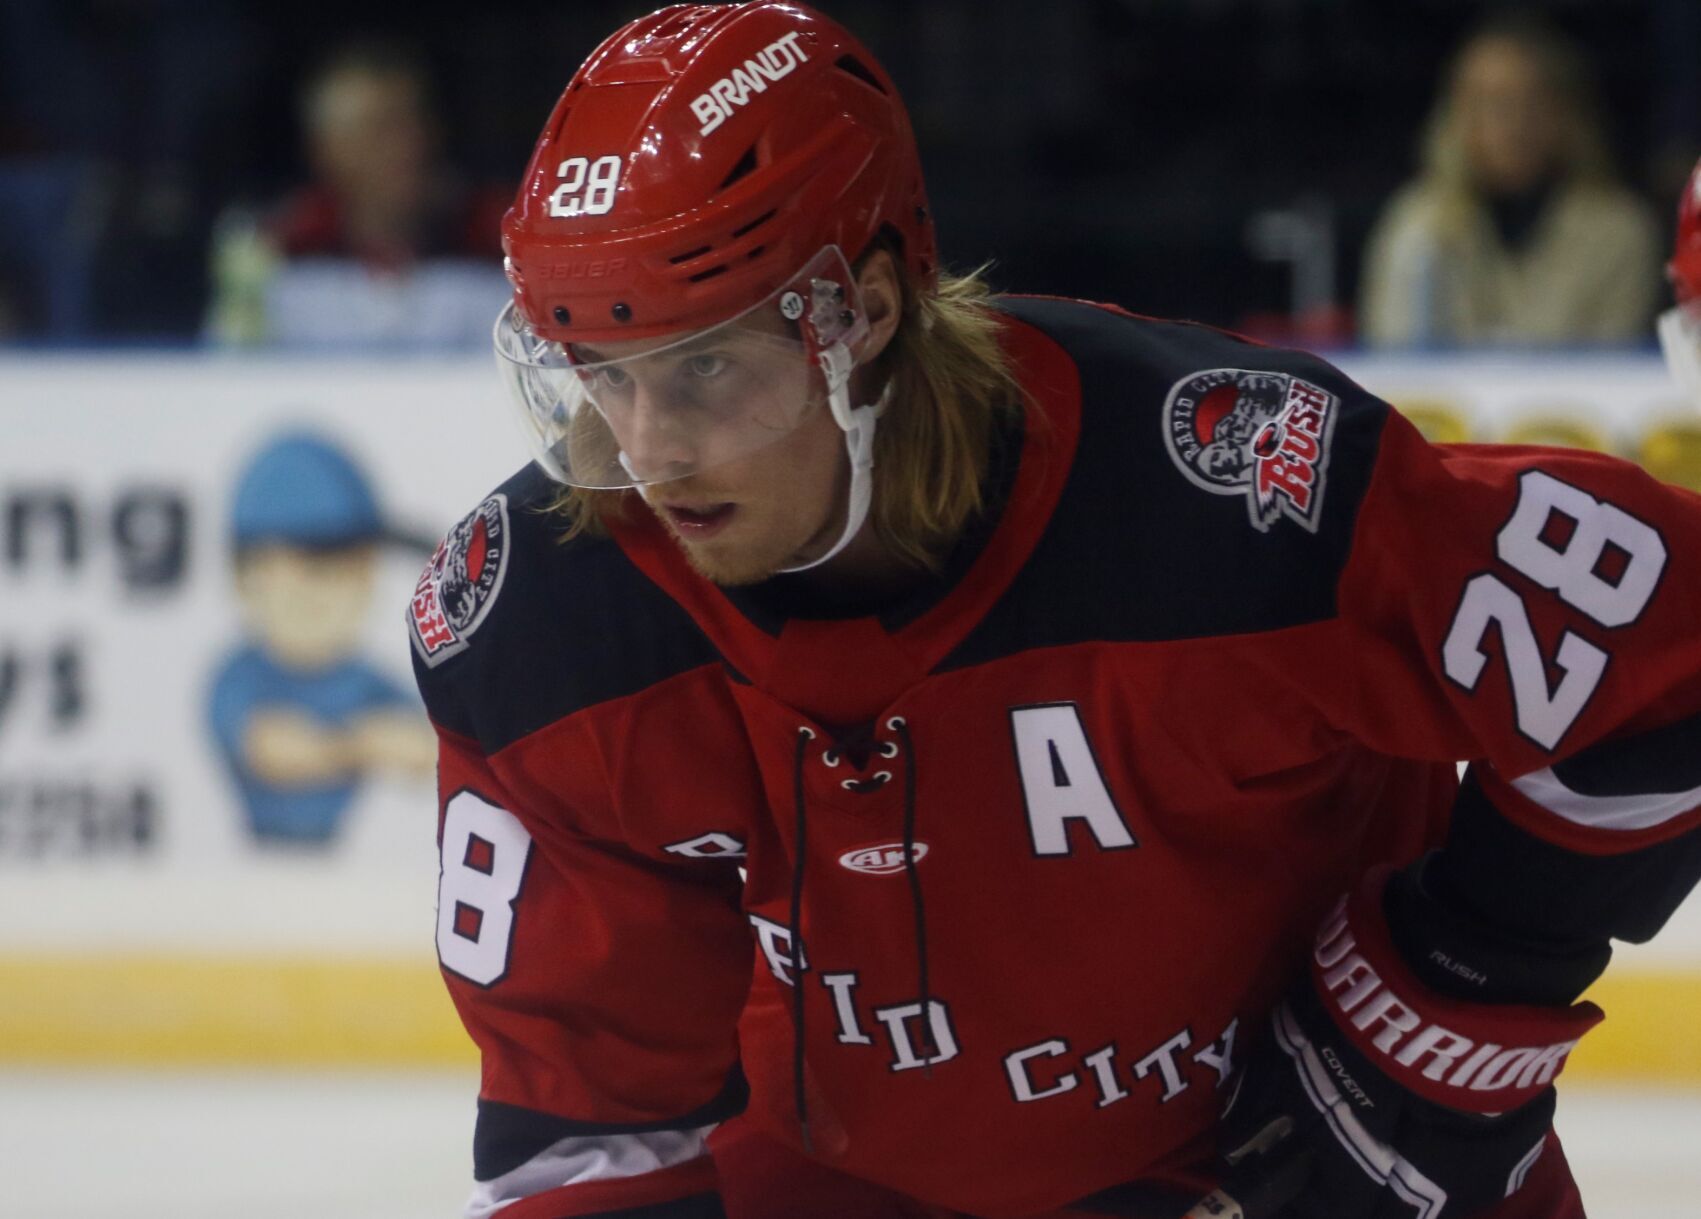 Logan Nelson earns 300th career ECHL point as Rush fall to Americans